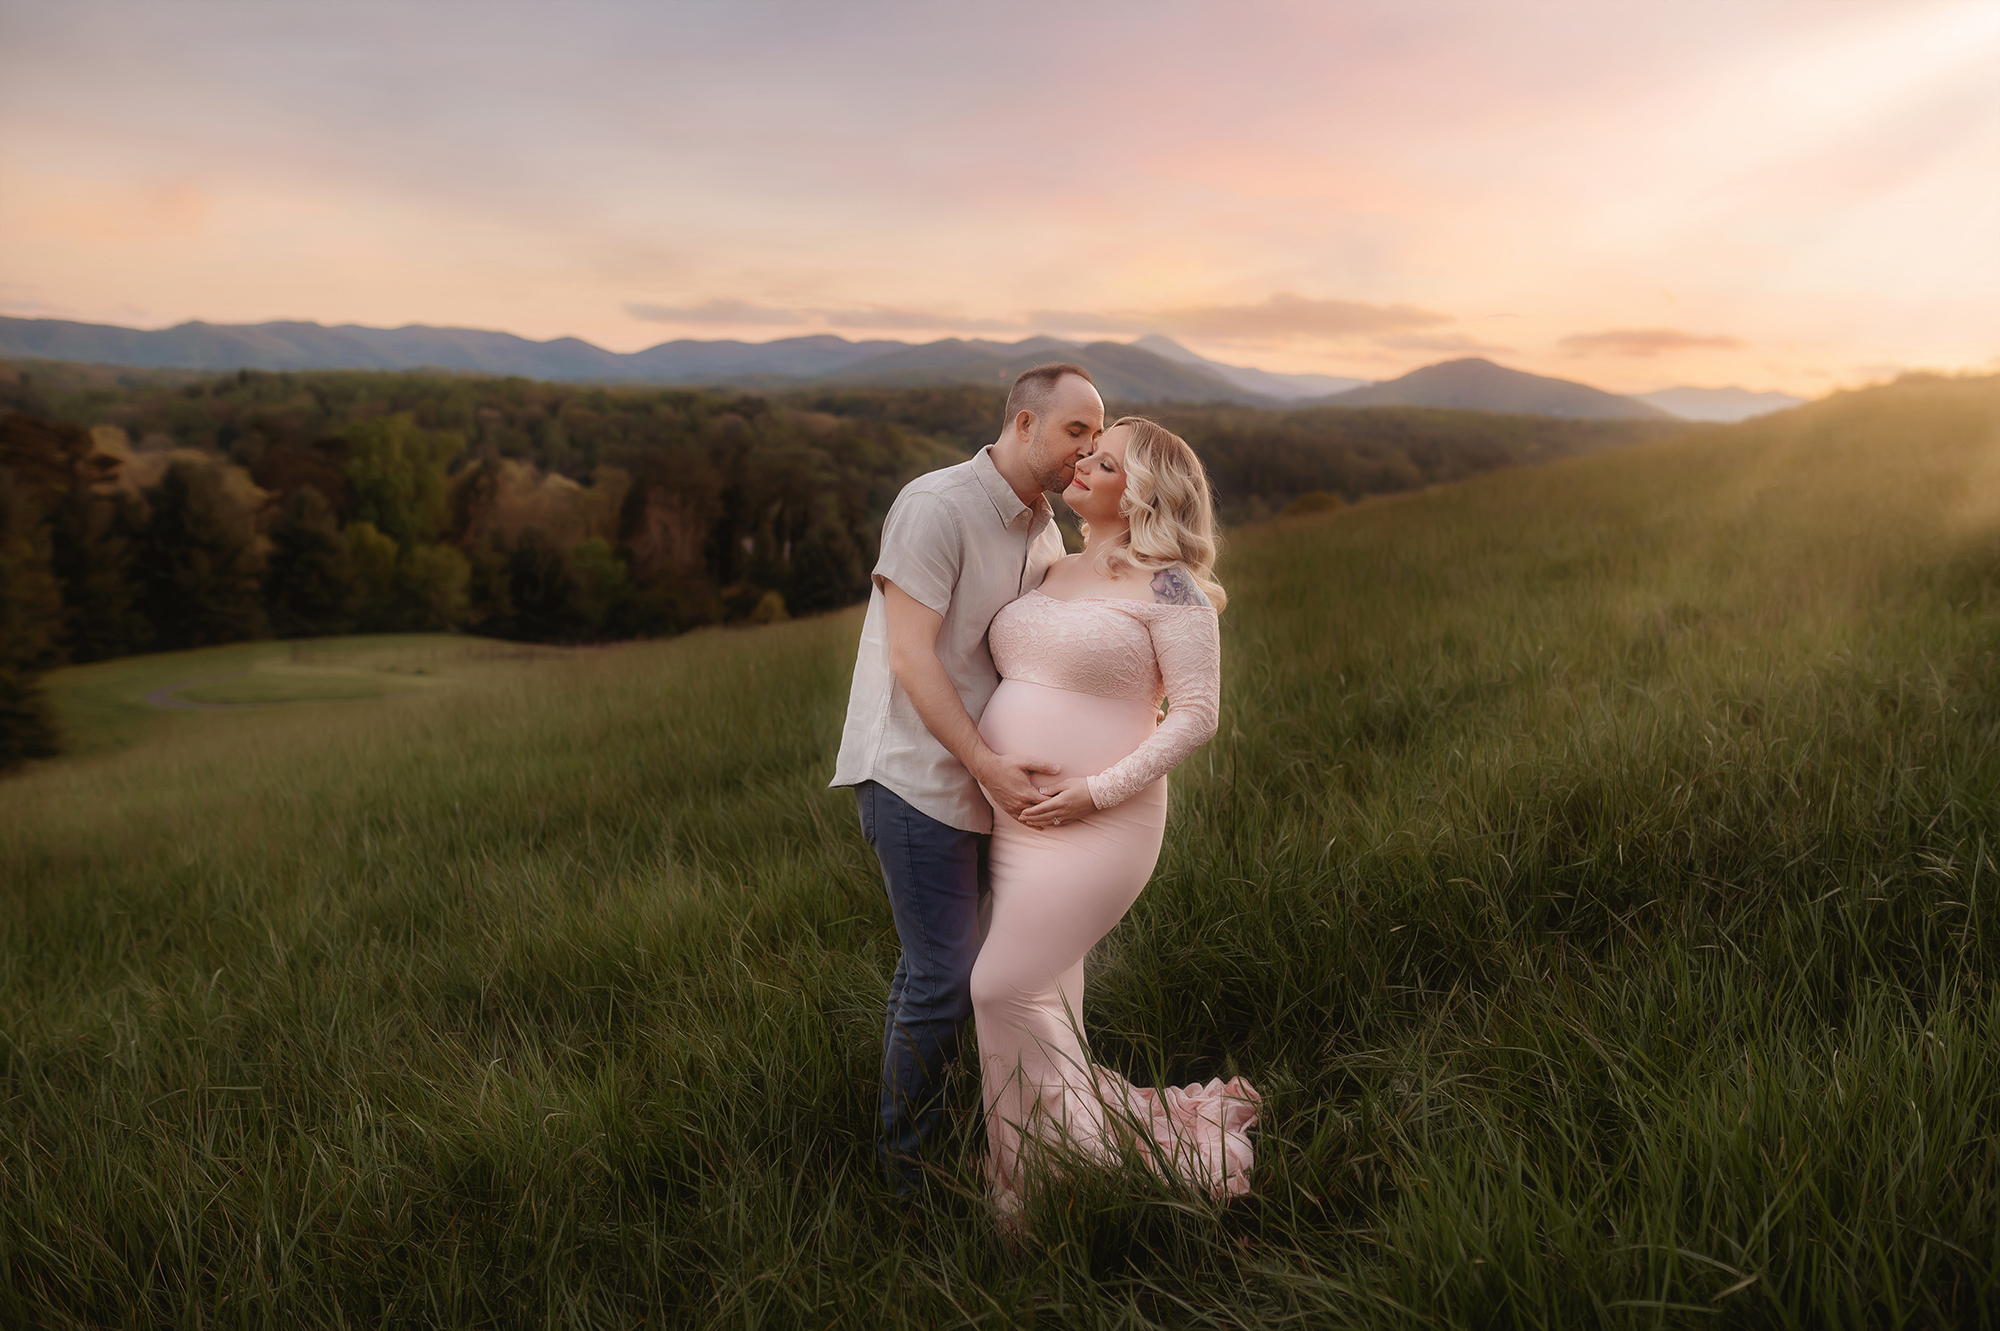 Expectant Parents pose for Maternity Photos at Biltmore Estate in Asheville, NC.